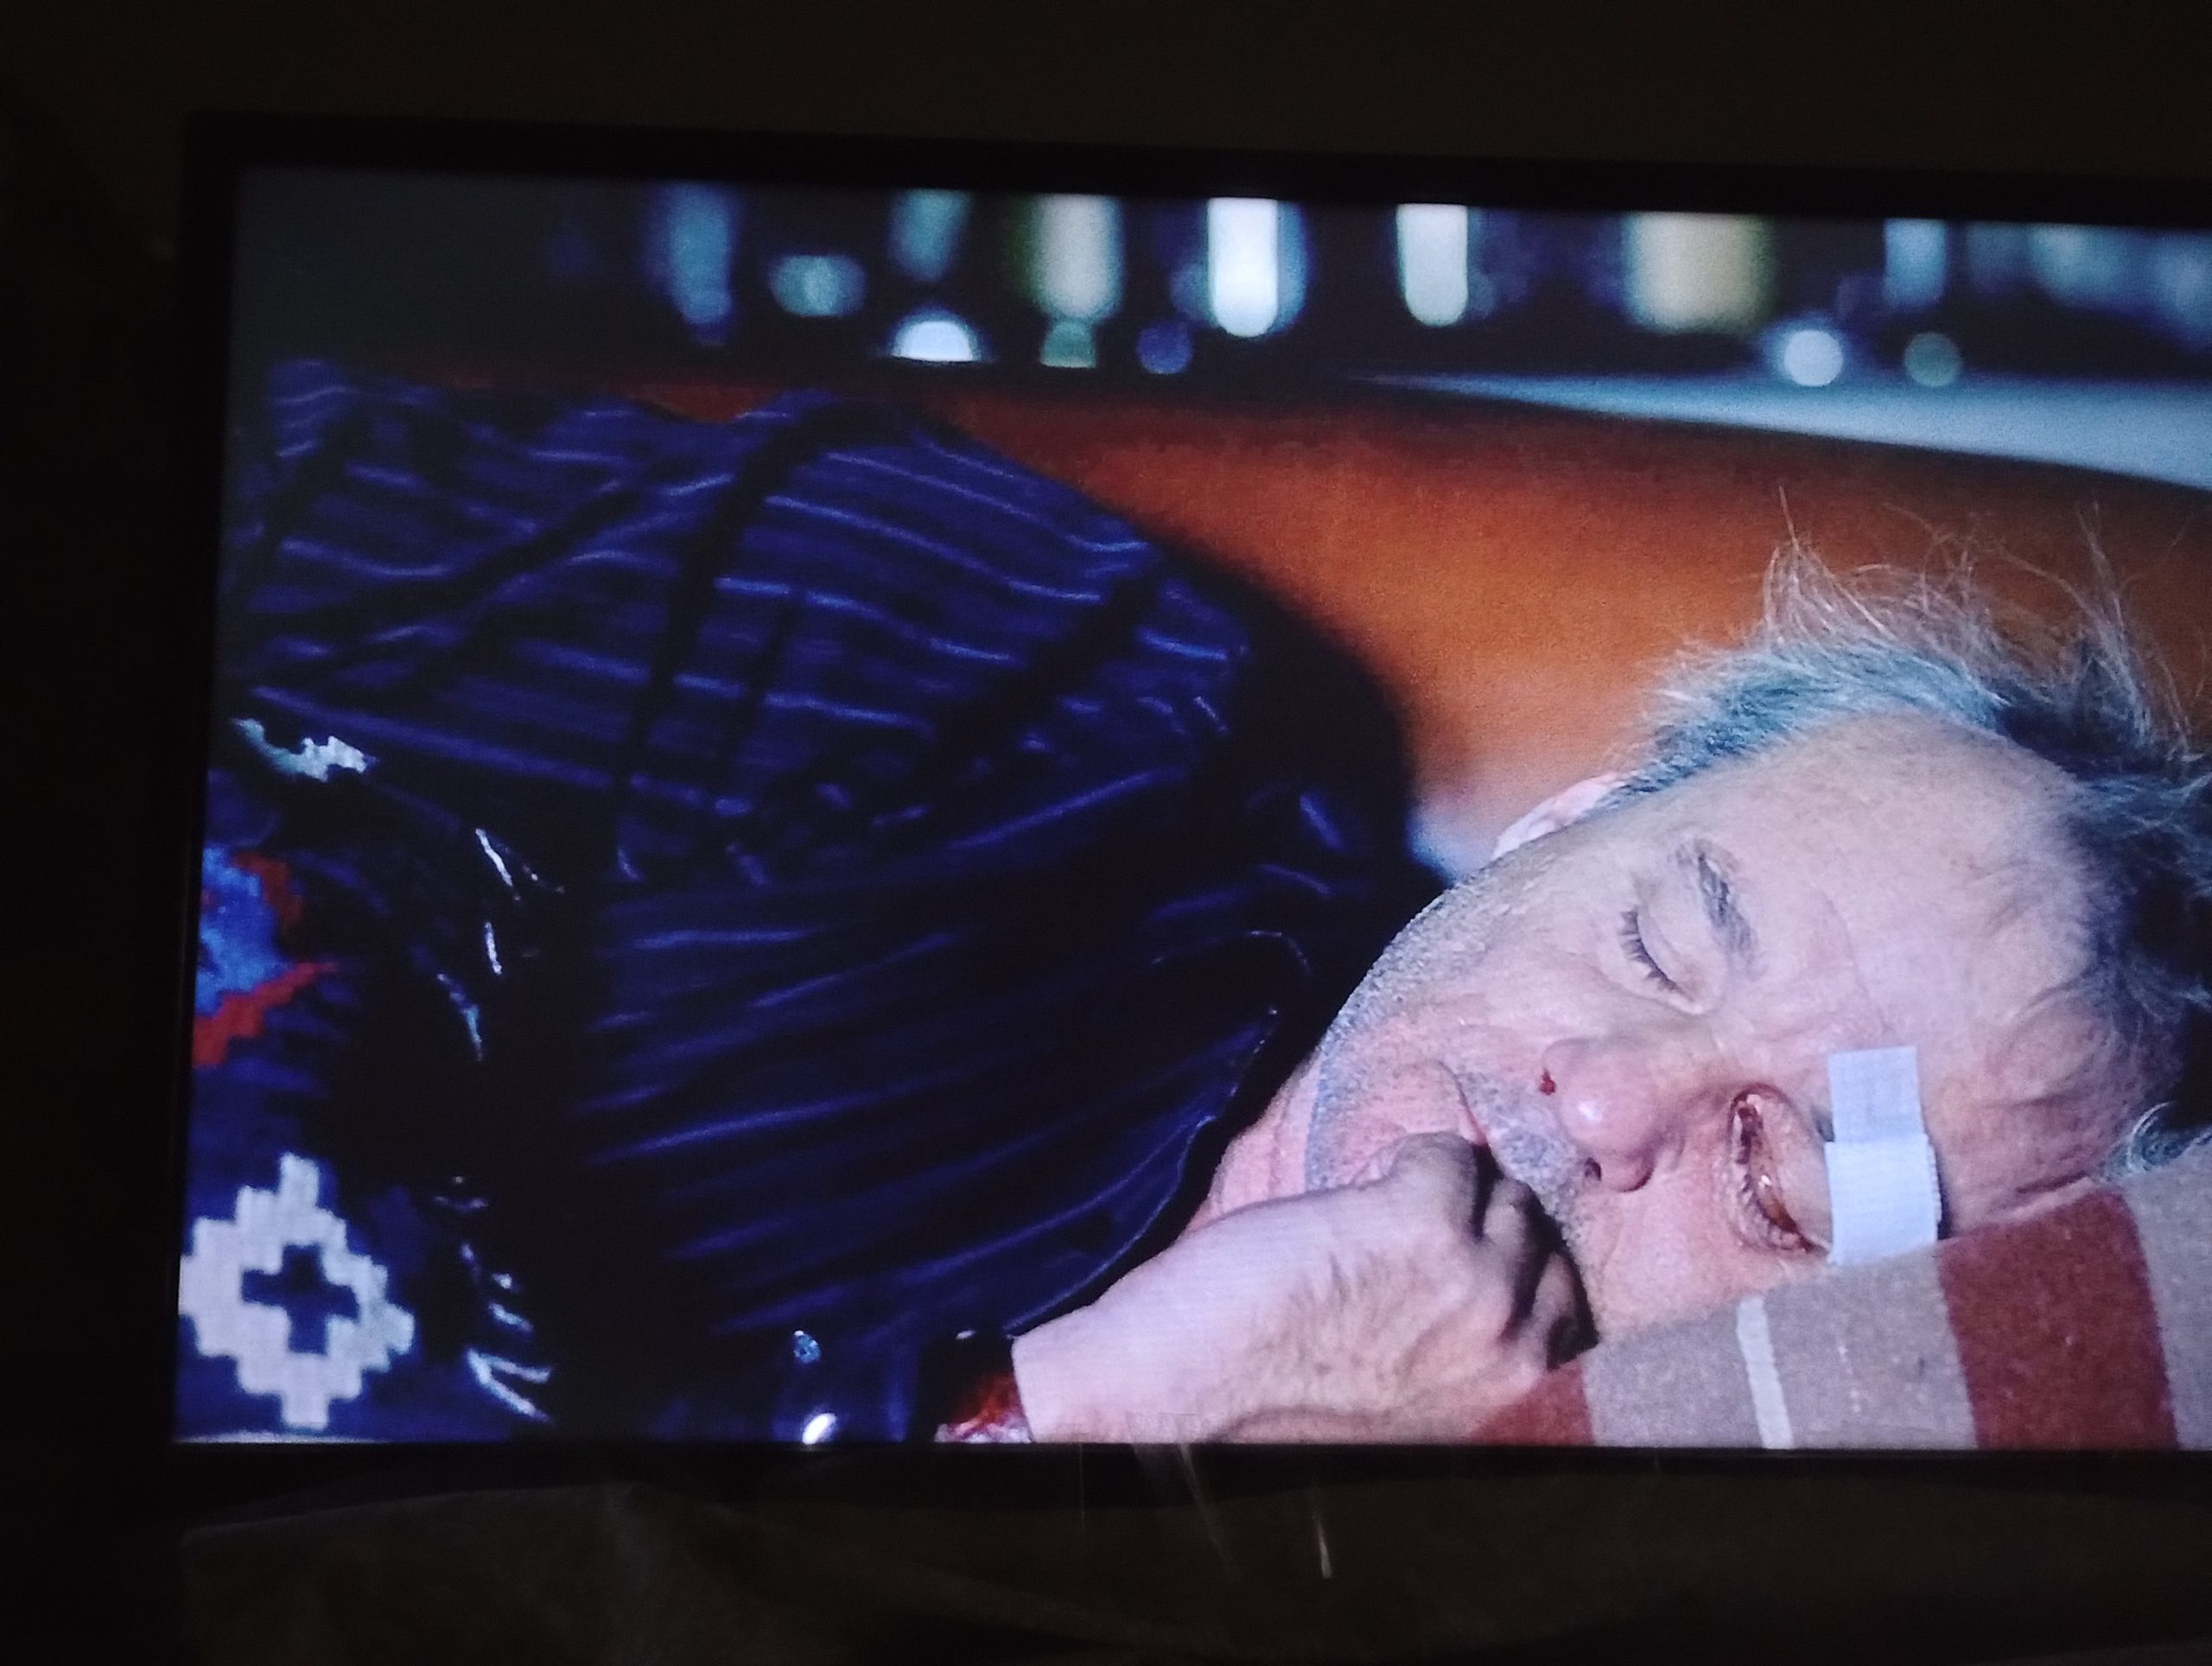 still from Jim Jarmusch movie Broken Flowers showing Don Johnston character clutching a pillow with a stair step design